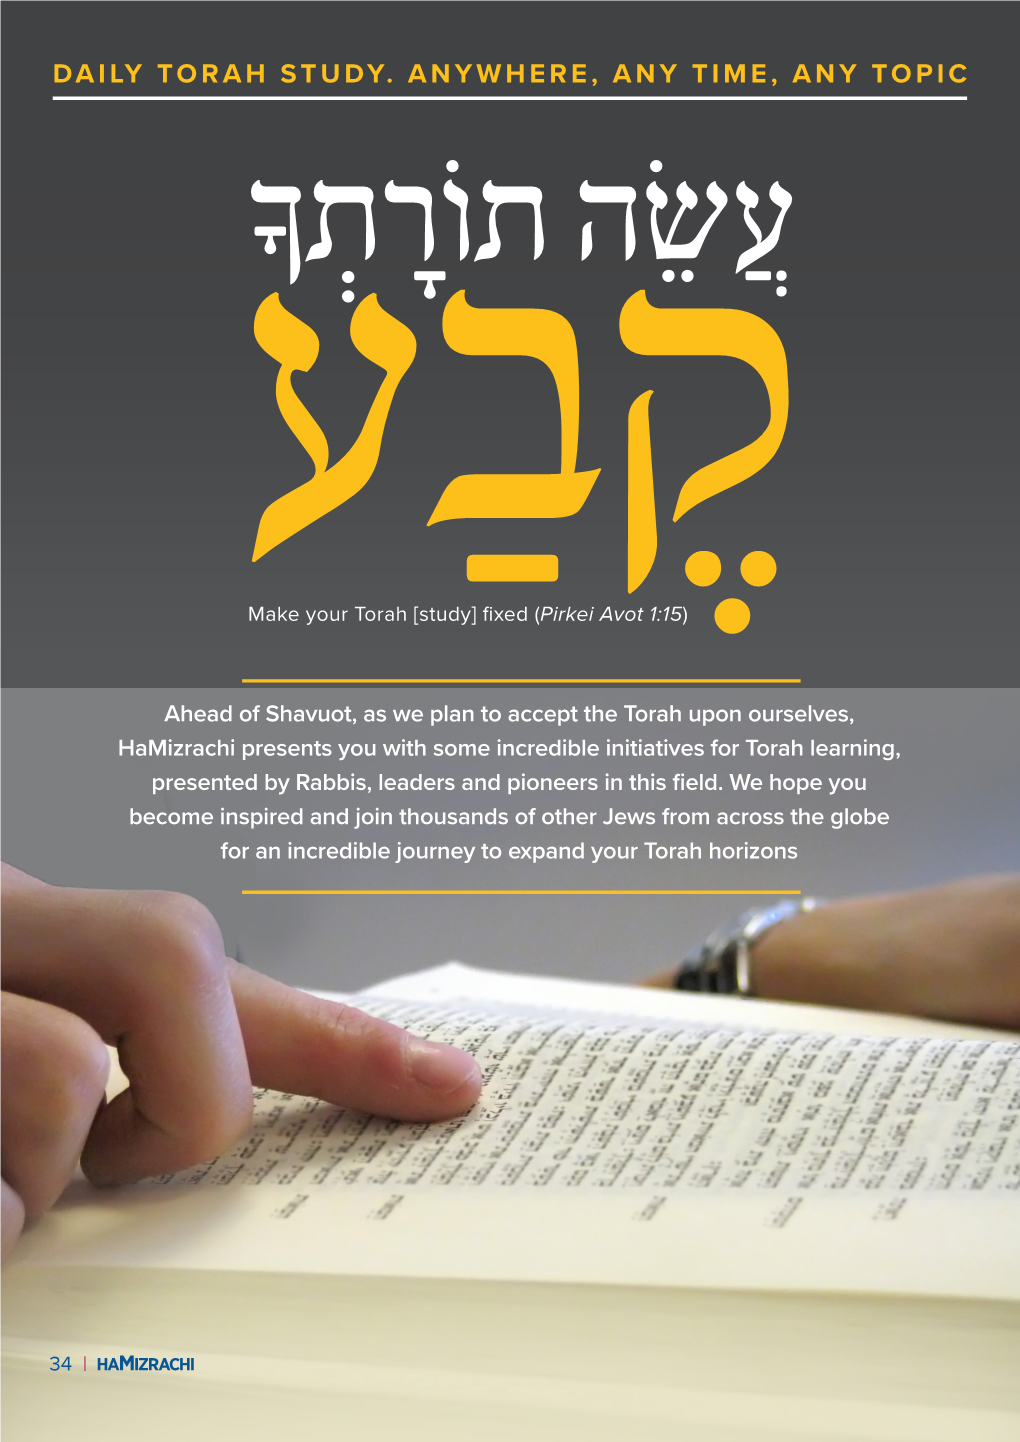 Daily Torah Study. Anywhere, Any Time, Any Topic